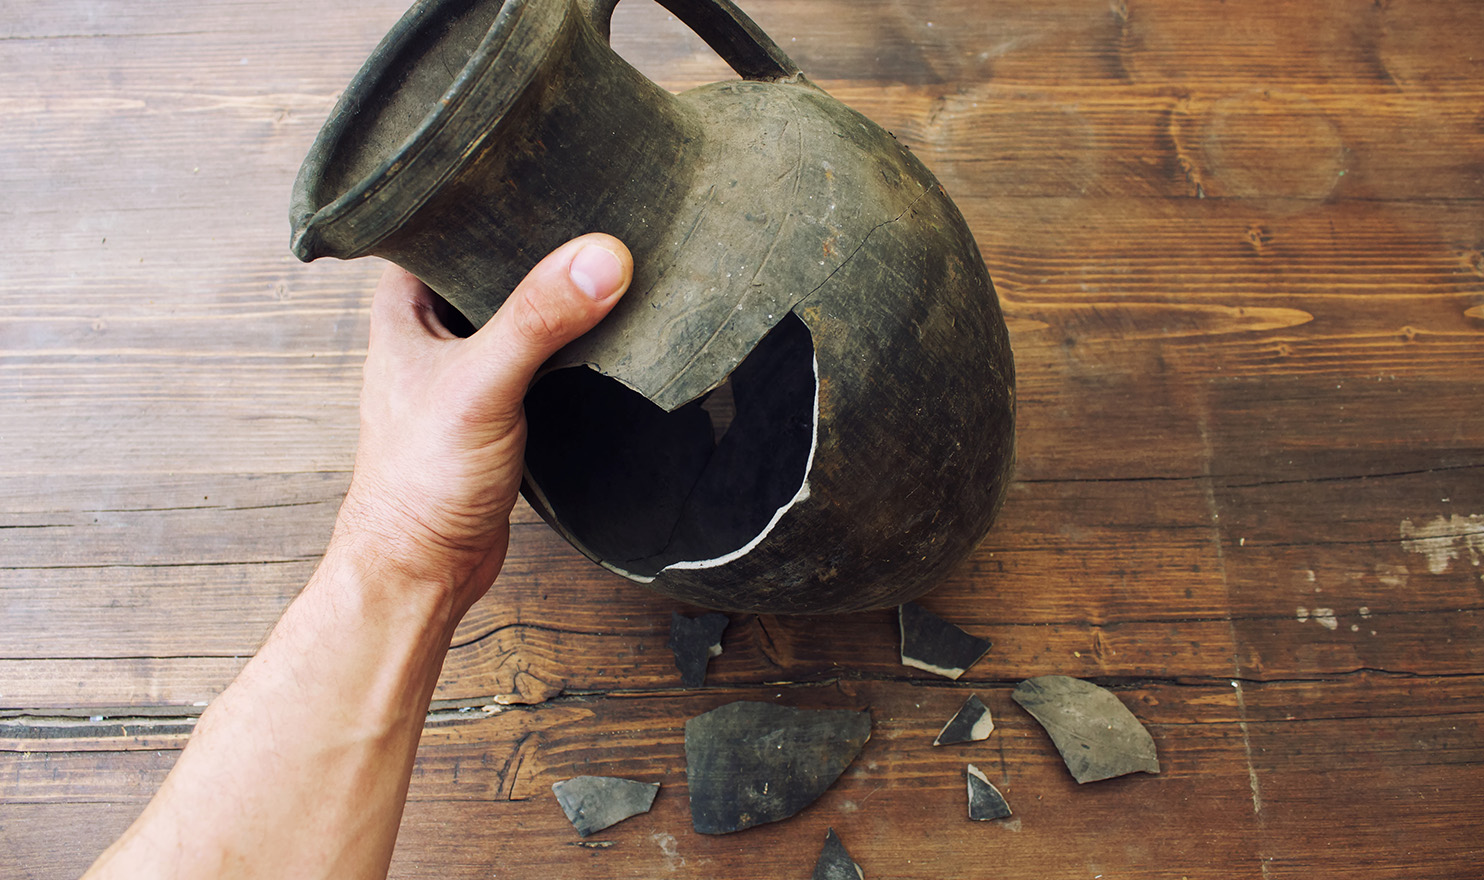 A man's hand is holding a broken vase on a brown wooden table next to the shattered pieces. If he cut his hand on the faulty vase, product liability insurance could help pay his medical bills.